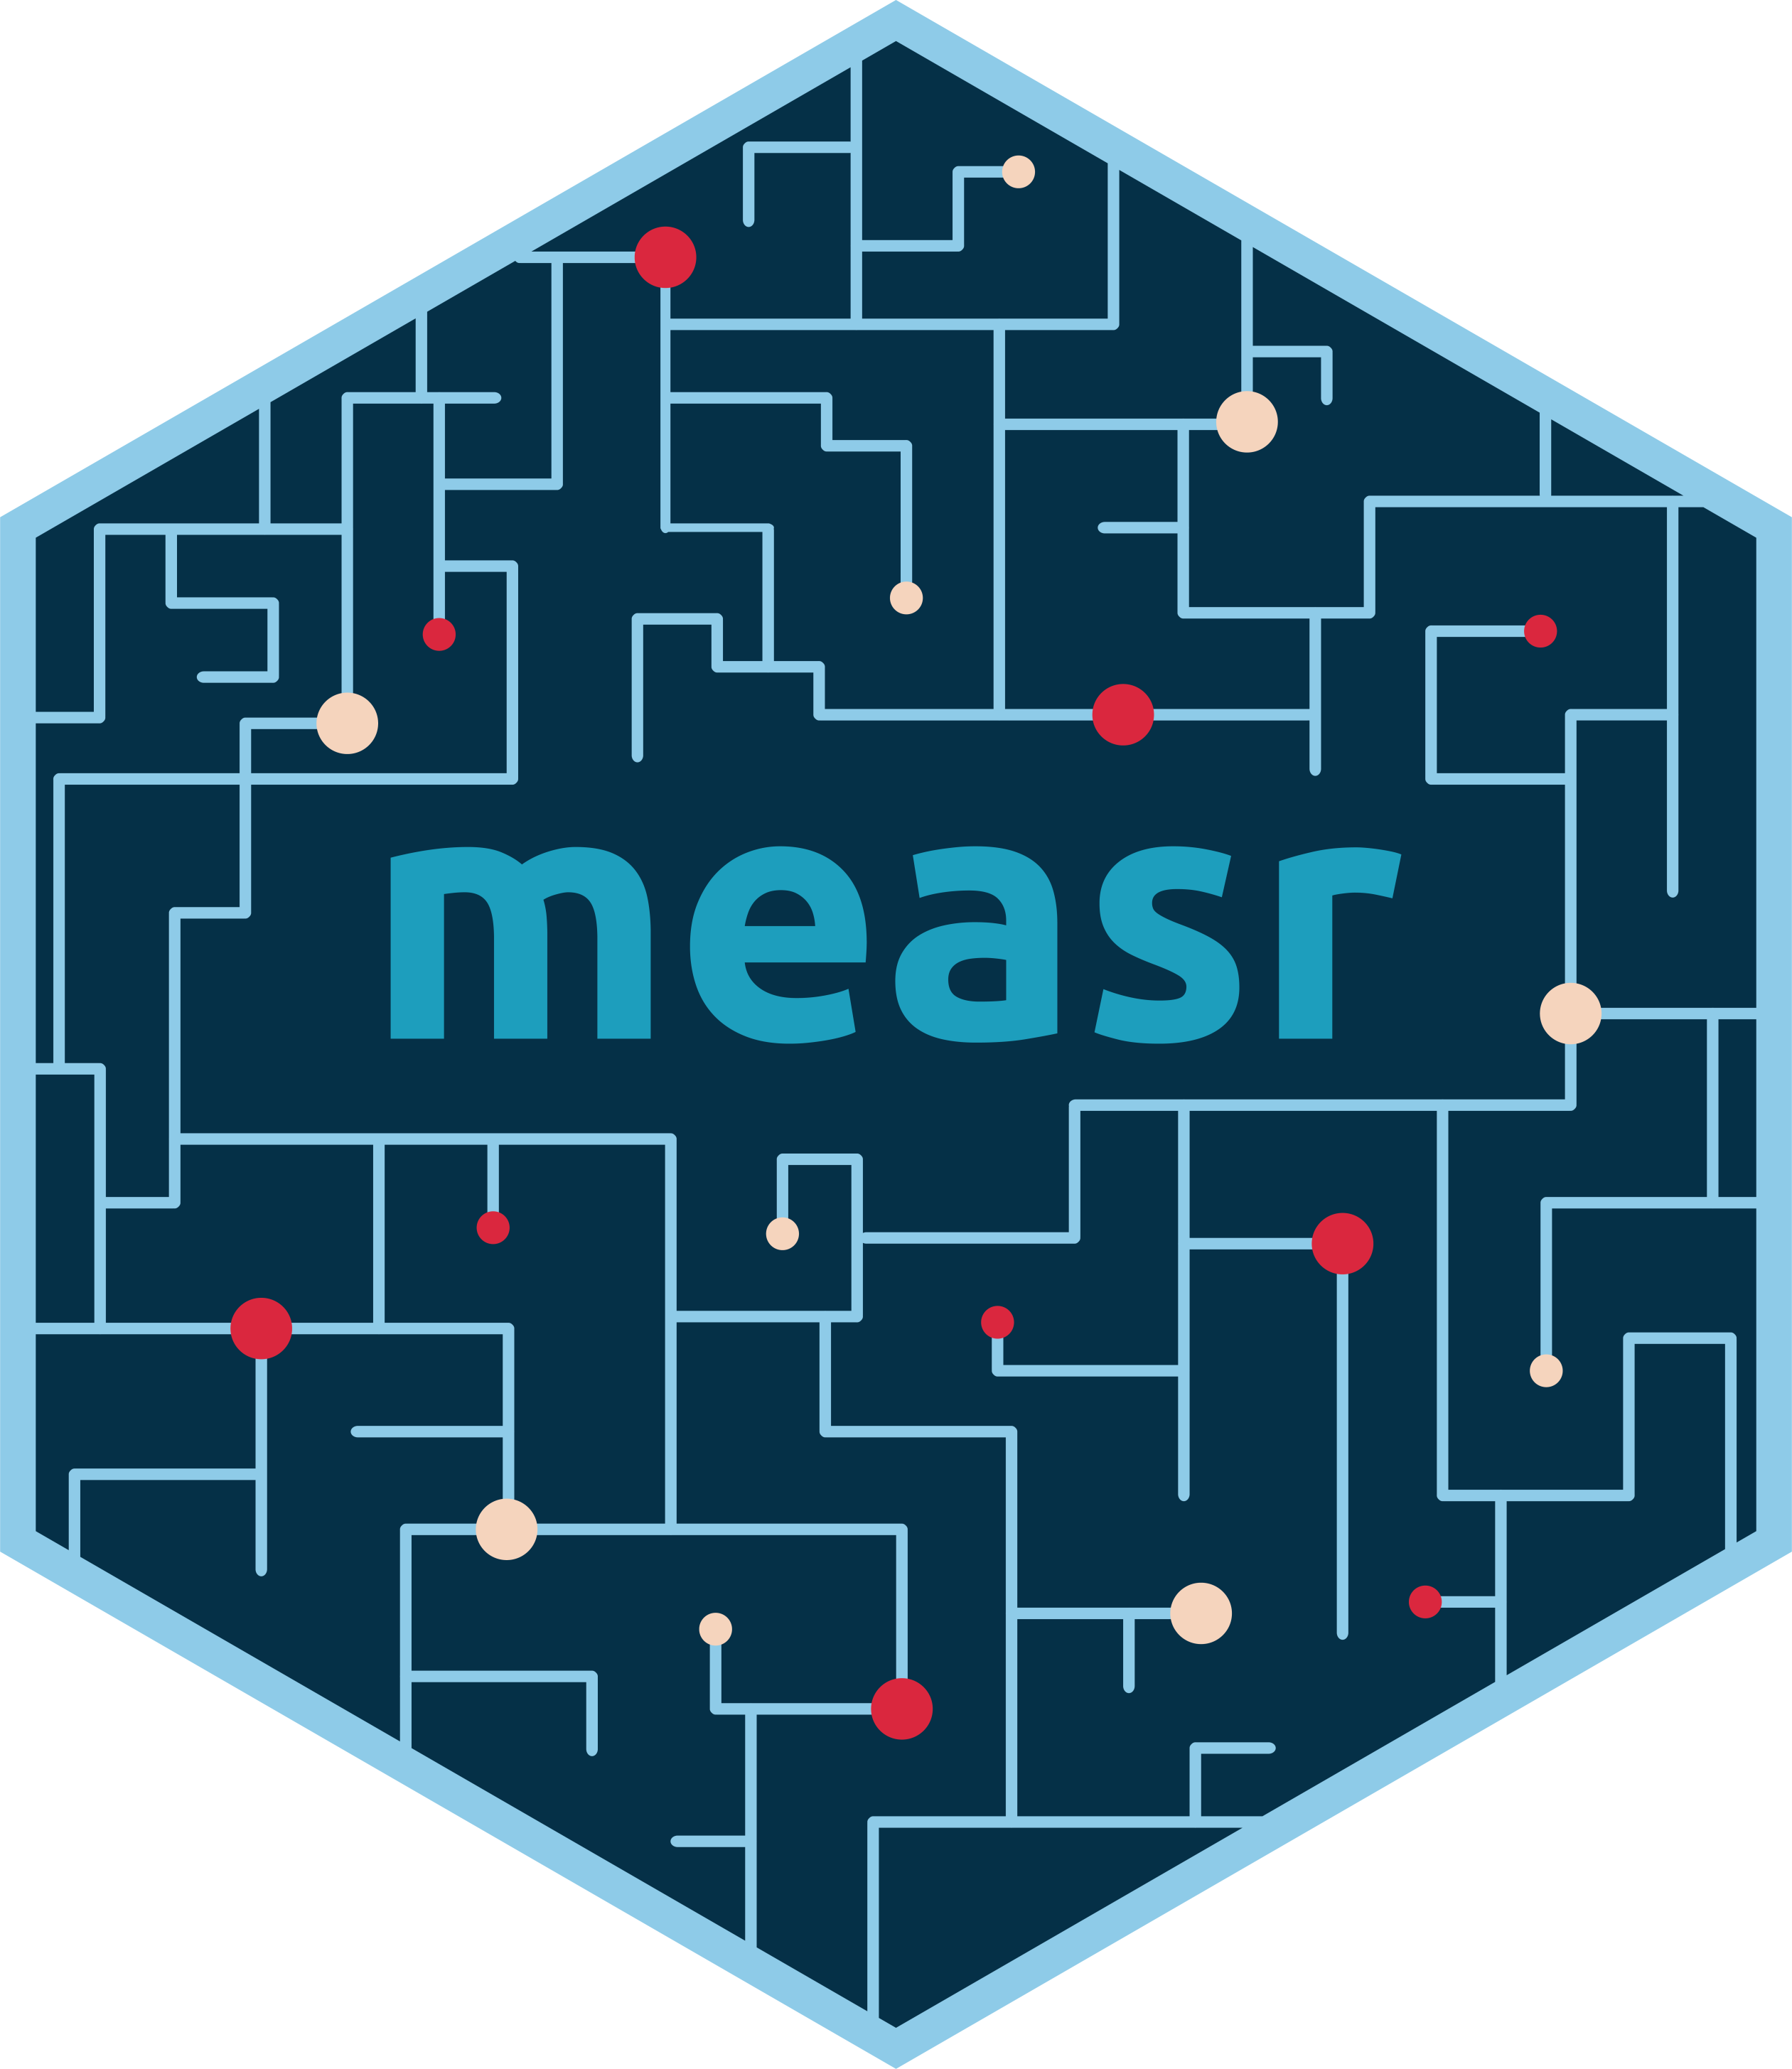 Hex logo for the measr package.